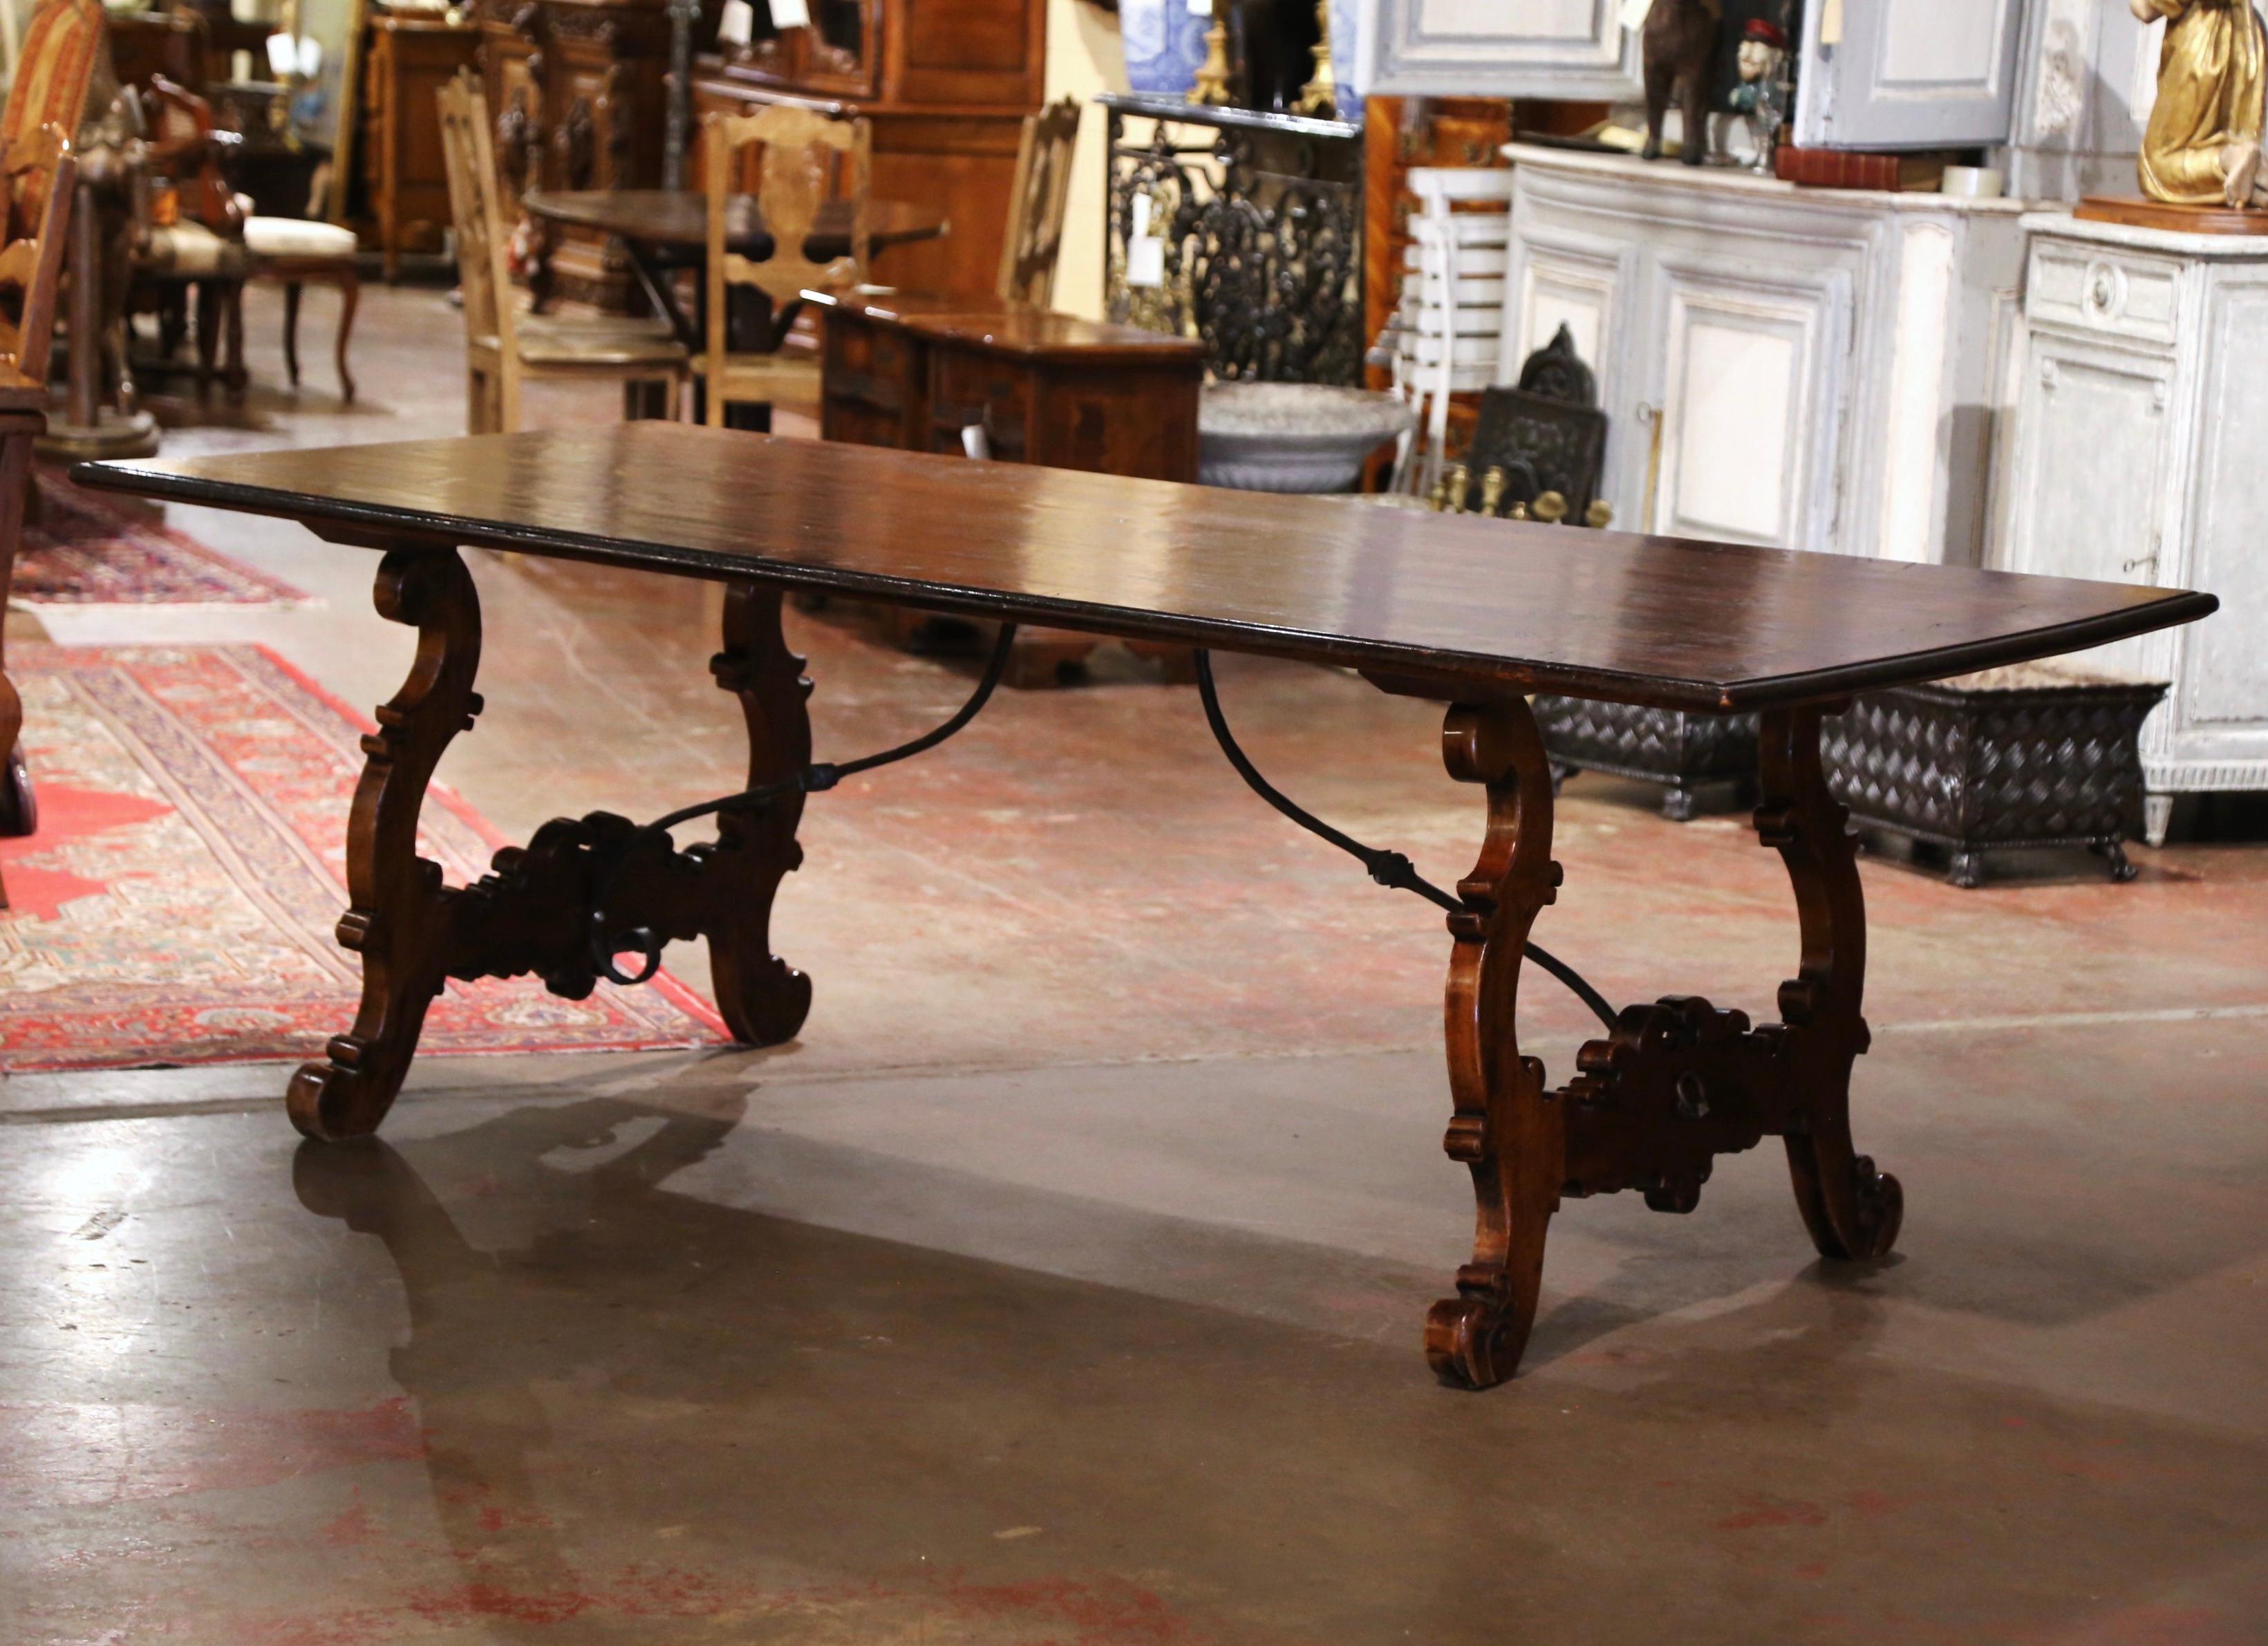 Decorate a dining or breakfast room with this elegant and large antique Spanish table. Carved in Spain circa 1980 and over 7 feet long, the trestle table stands on carved ox yoke leg supports, joined together with a thick scrolled forged double iron